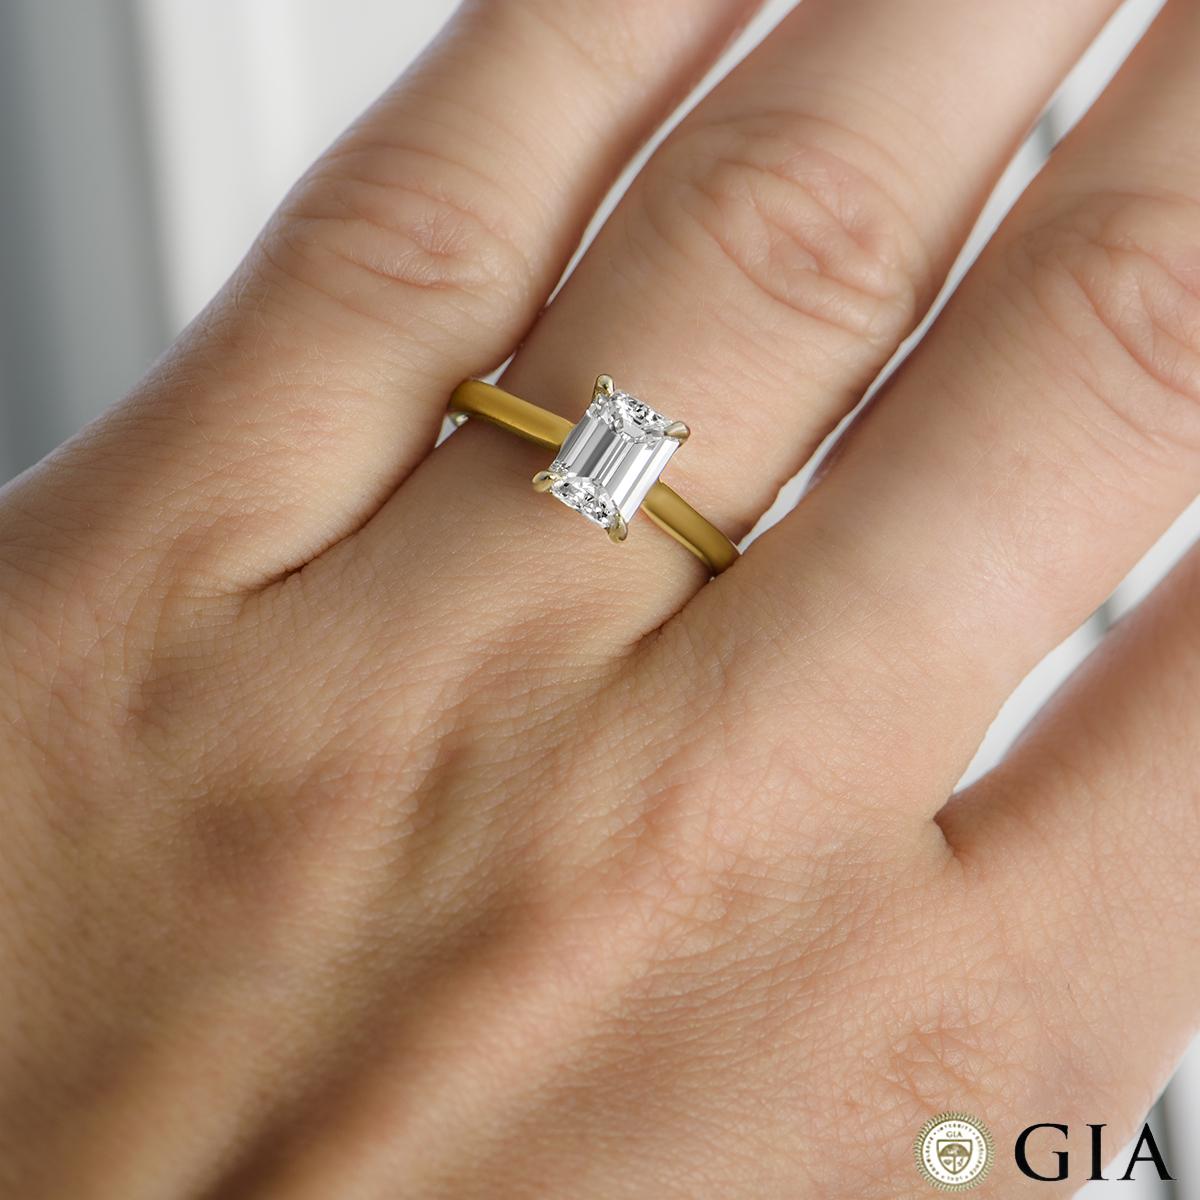 GIA Cert Yellow Gold Emerald Cut Diamond Solitaire Engagement Ring 1.31 Carat For Sale 2